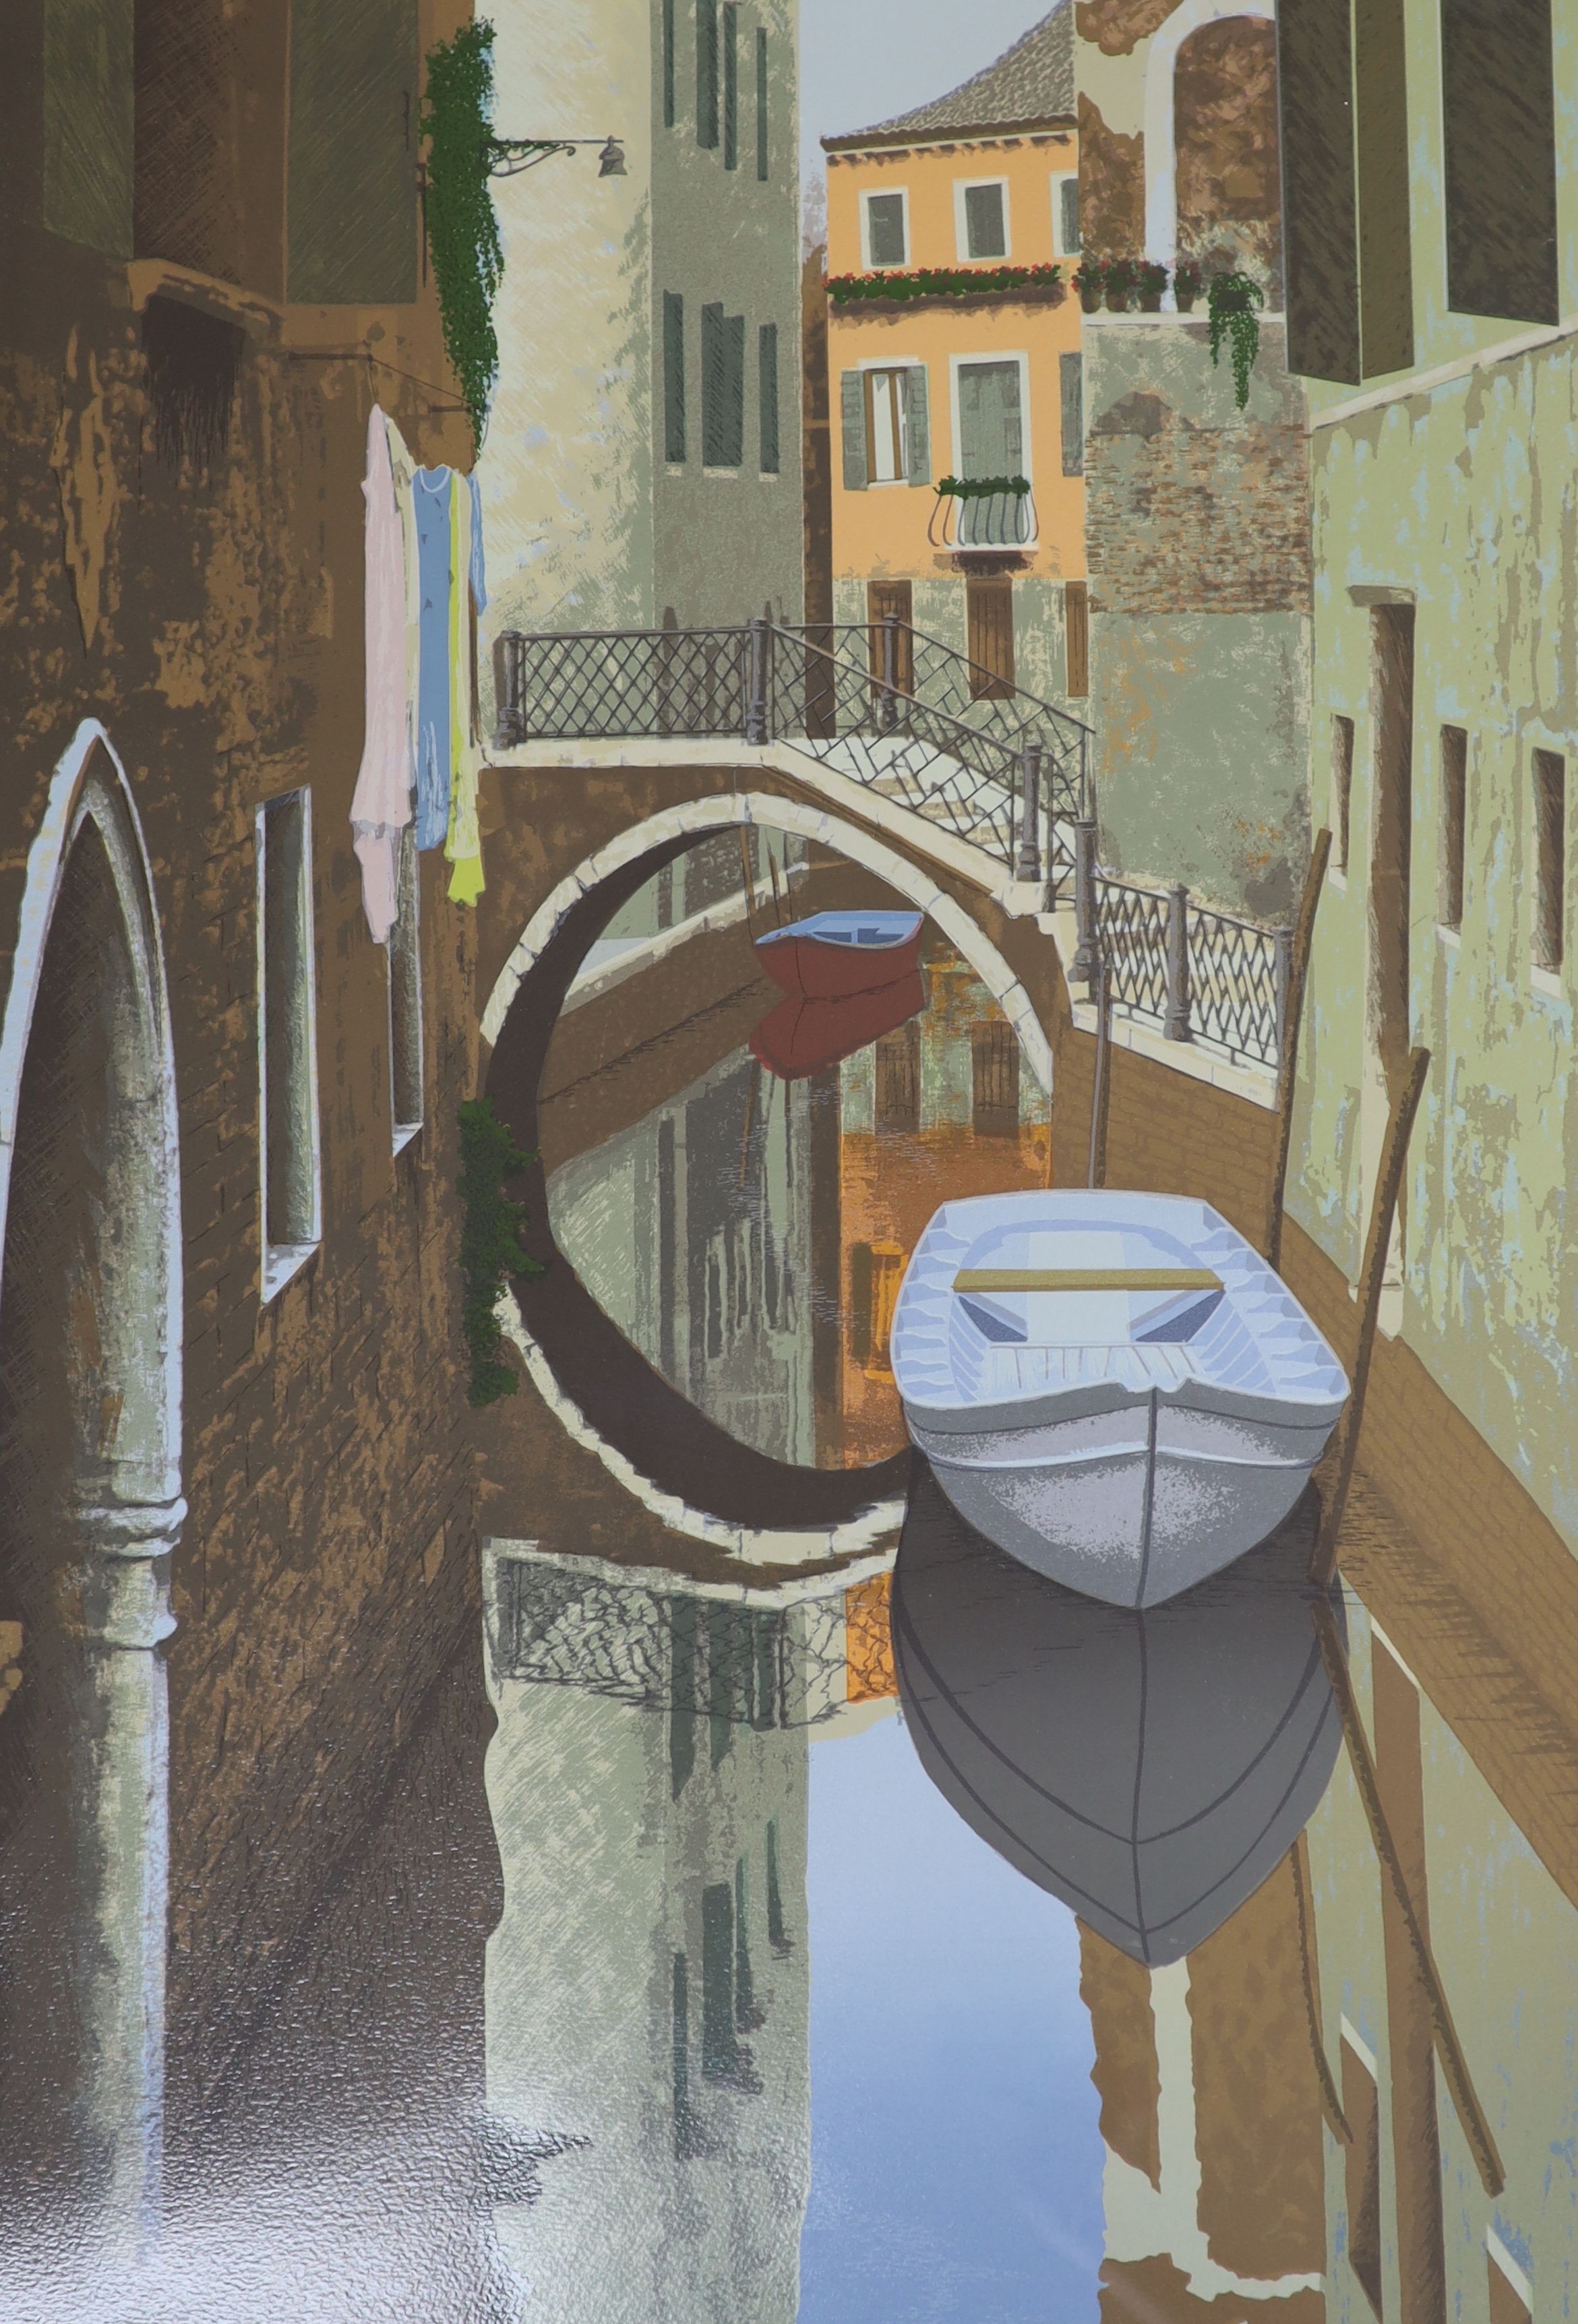 Graham Bannister (b.1954), limited edition print, Venetian canal scene, signed in pencil 89/150,